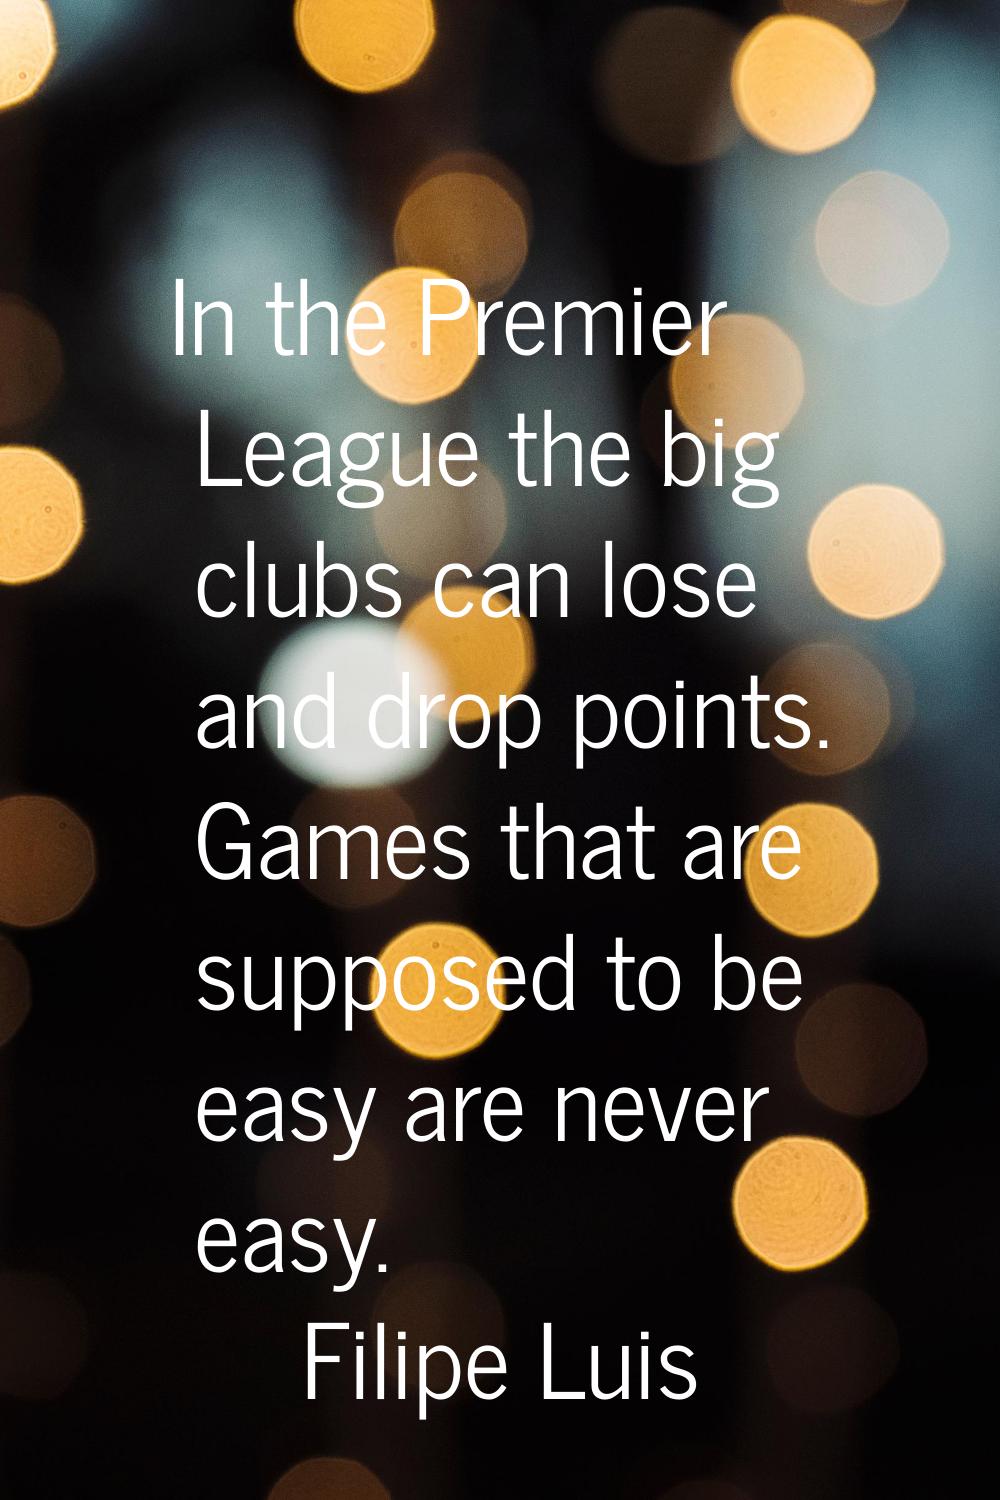 In the Premier League the big clubs can lose and drop points. Games that are supposed to be easy ar